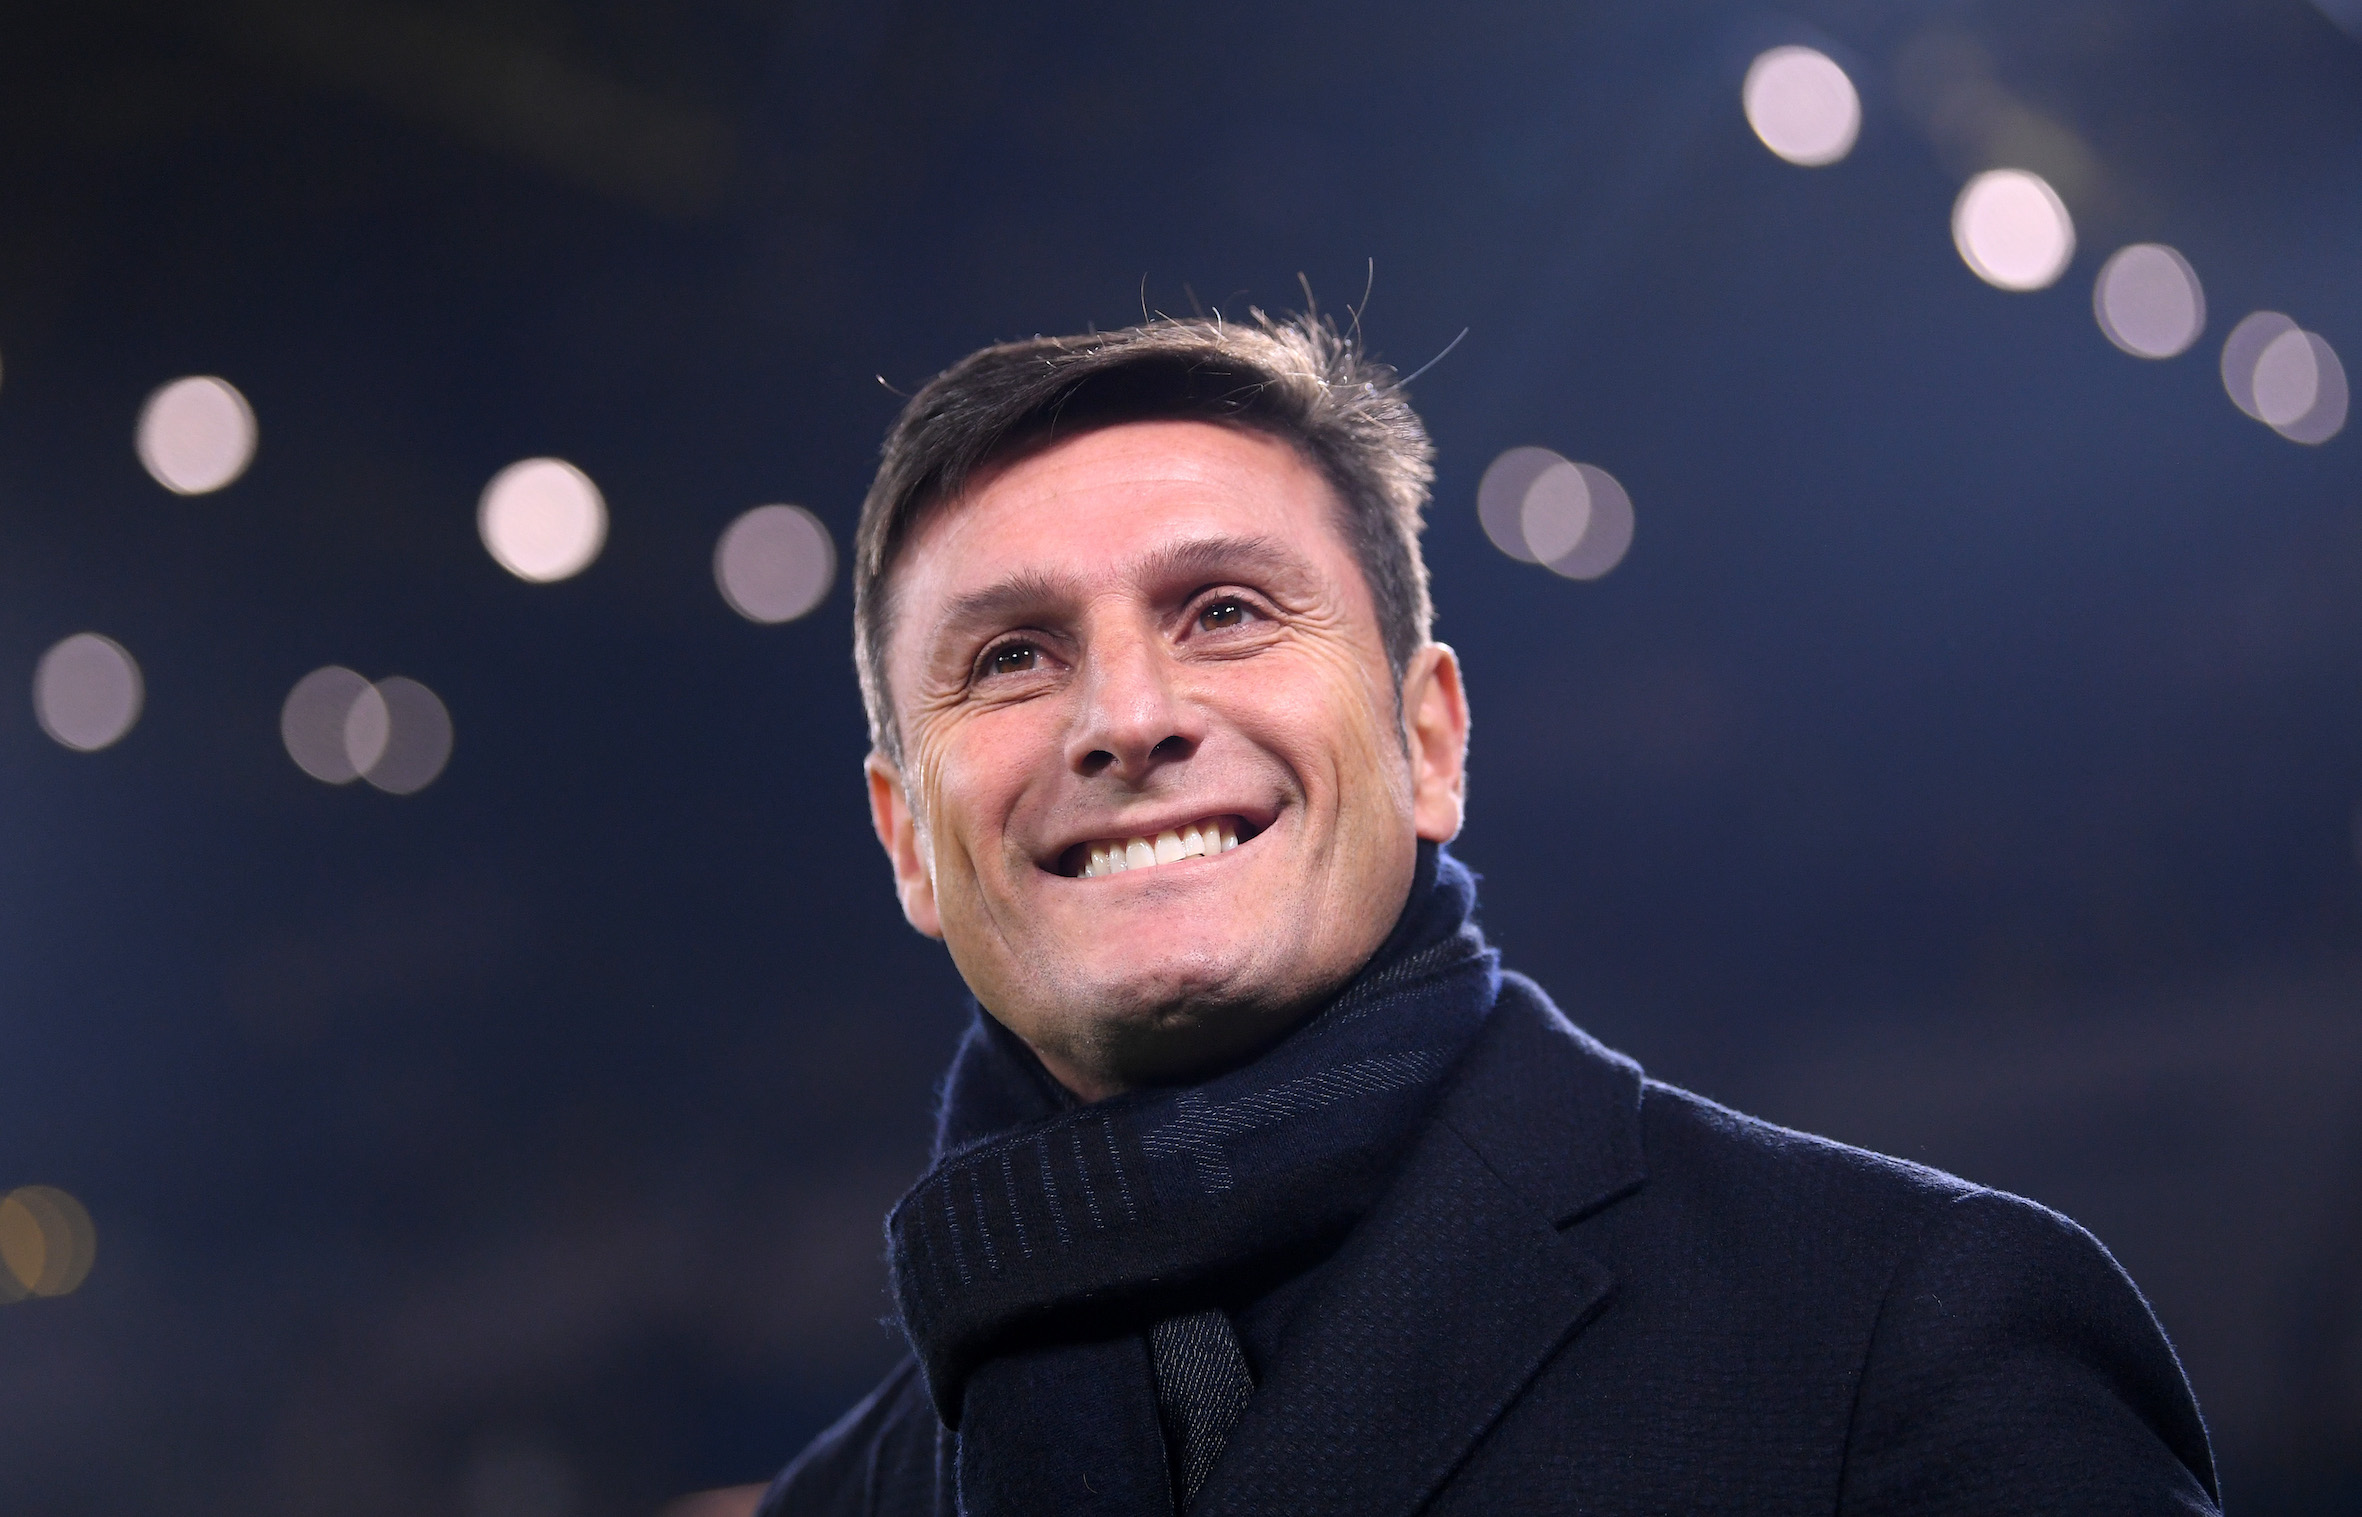 Inter Milan star that Jurgen Klopp labelled as ‘one of the most exciting strikers in the world’ is ‘happy’ at the Serie A club according to Javier Zanetti